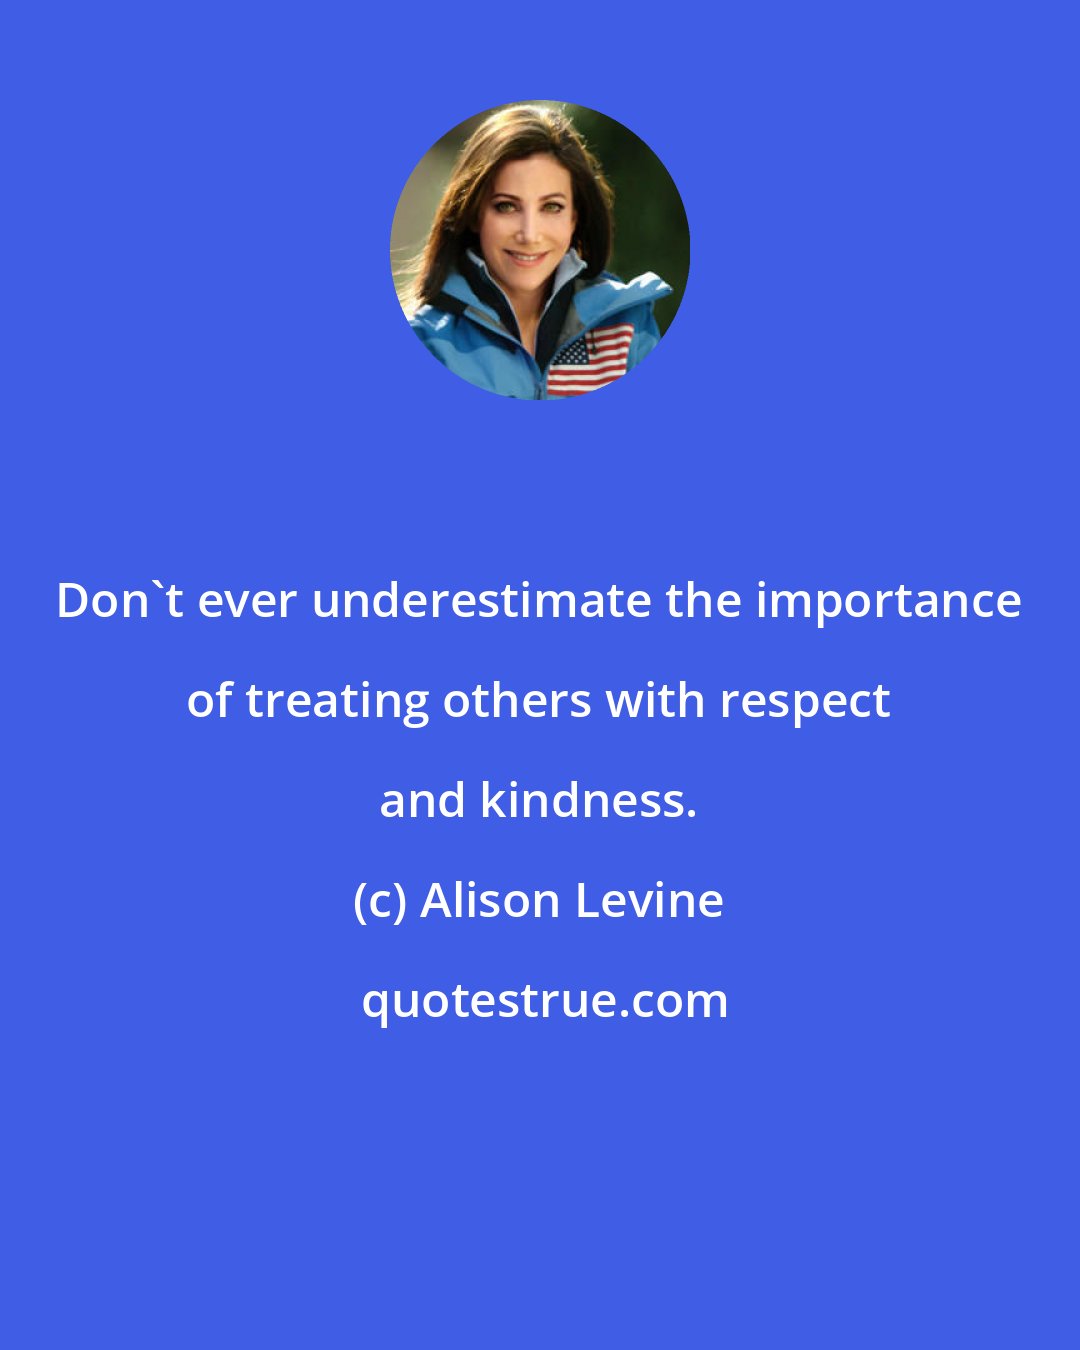 Alison Levine: Don't ever underestimate the importance of treating others with respect and kindness.